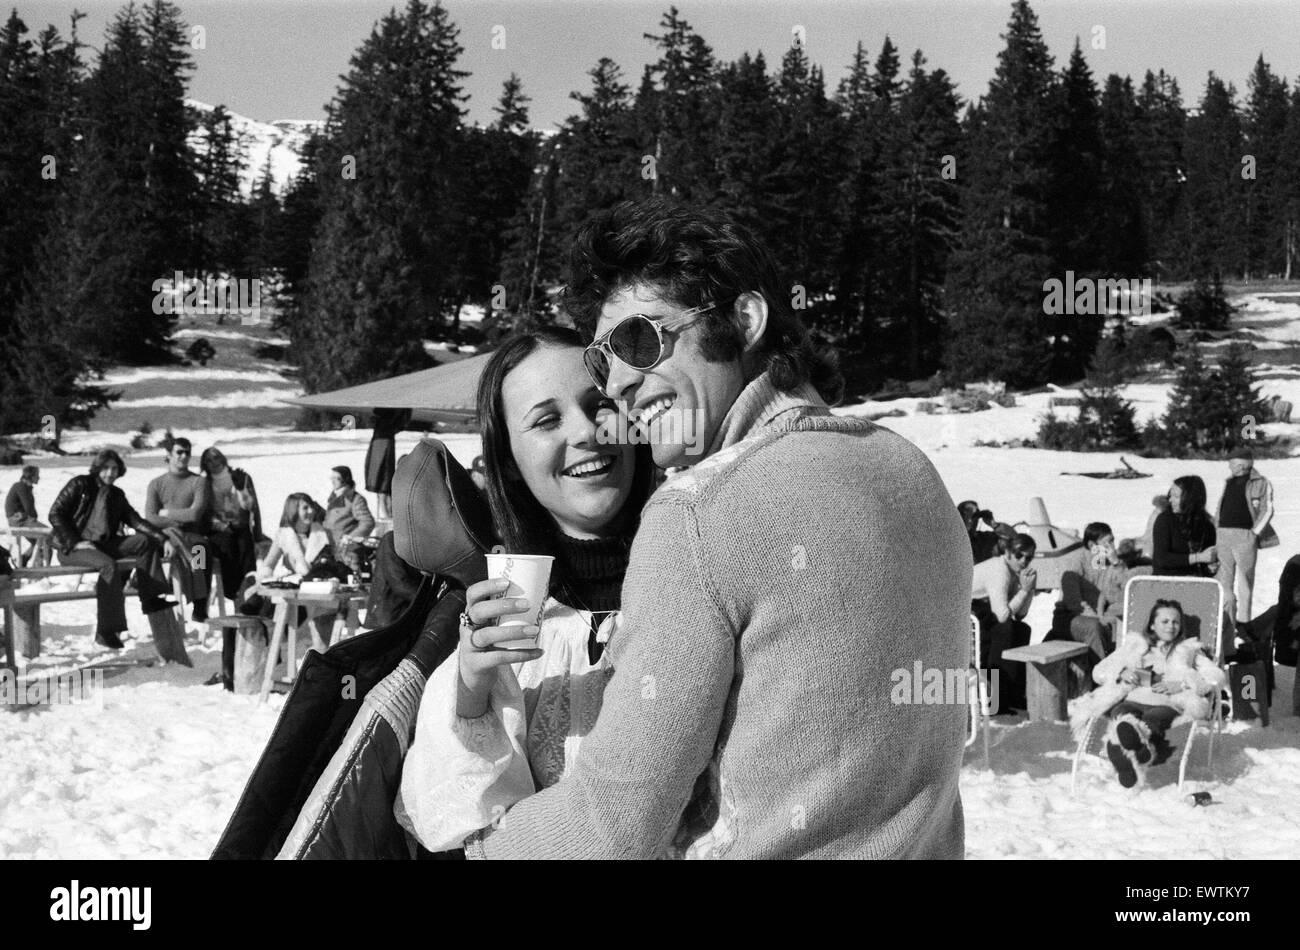 Francois Cevert enjoys some time off with a girl friend at a ski resort in Villars Sur Ollan, near Montreux, Switzerland, in March 1973.